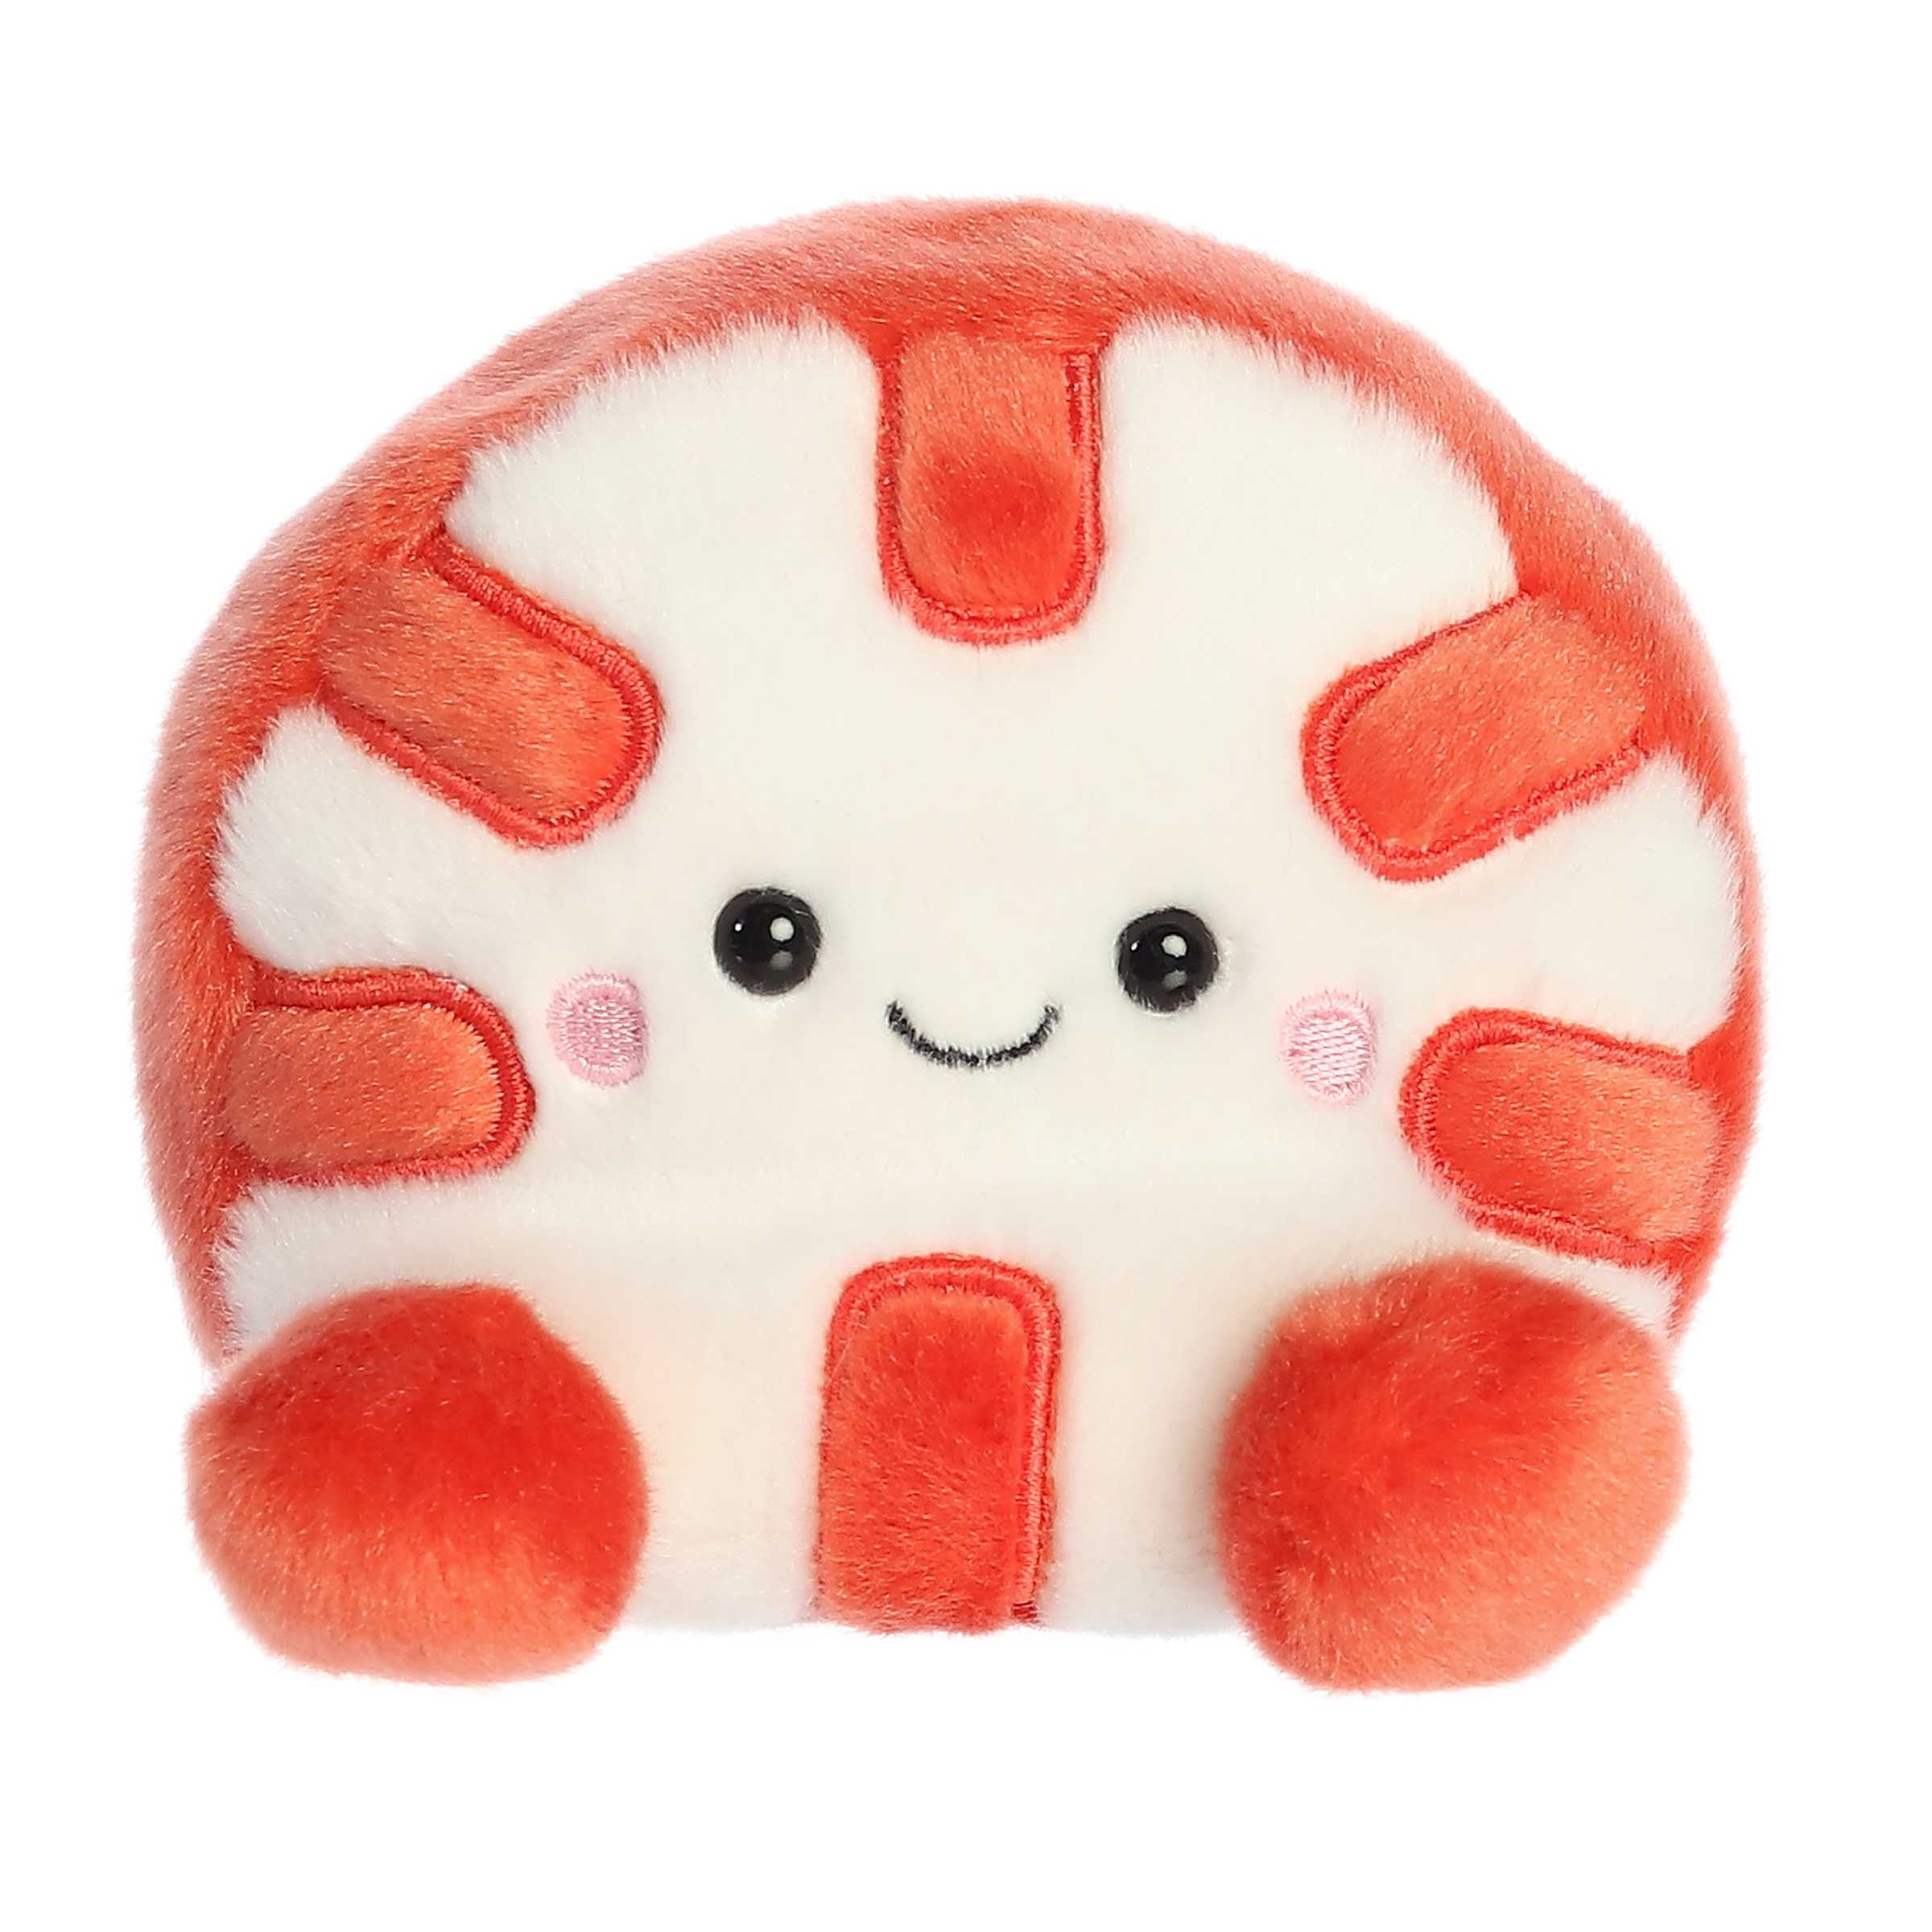 Adorable, happy, mini peppermint candy plush toy sitting with red and white swirls going almost into the middle